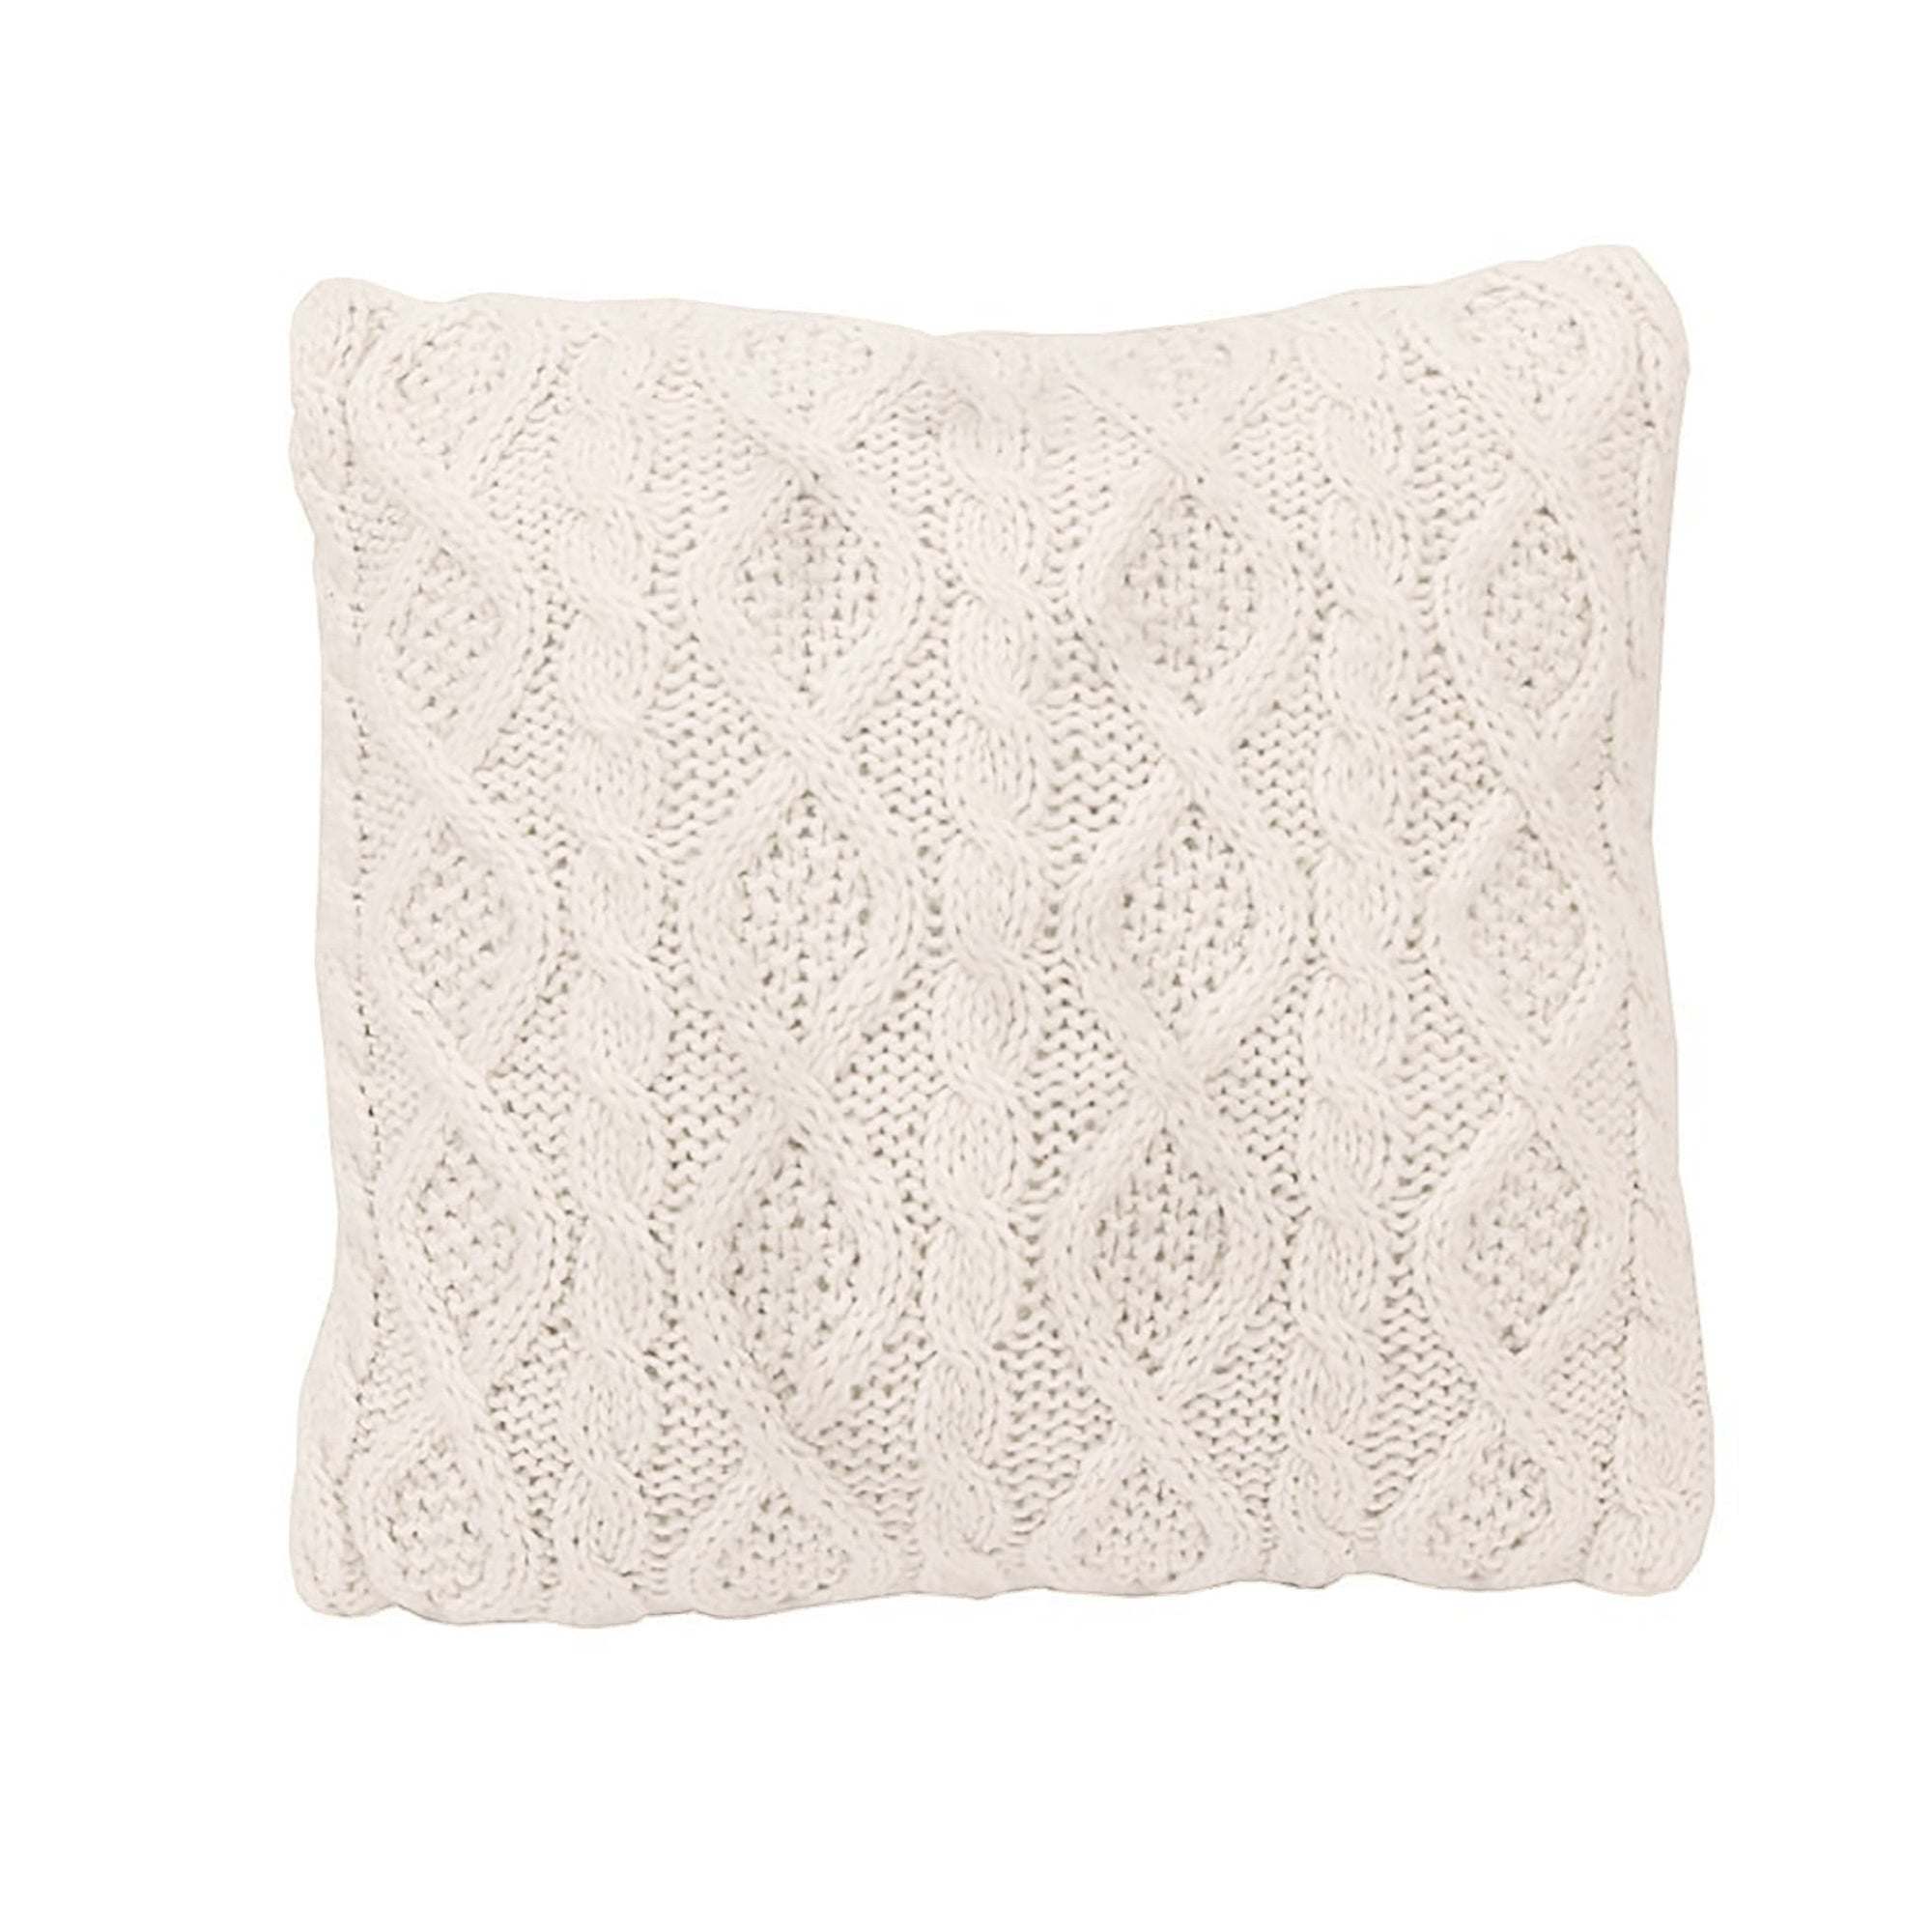 Cable Knit Soft Diamond Throw Pillow, 3 Colors, 18x18 Cream Pillow